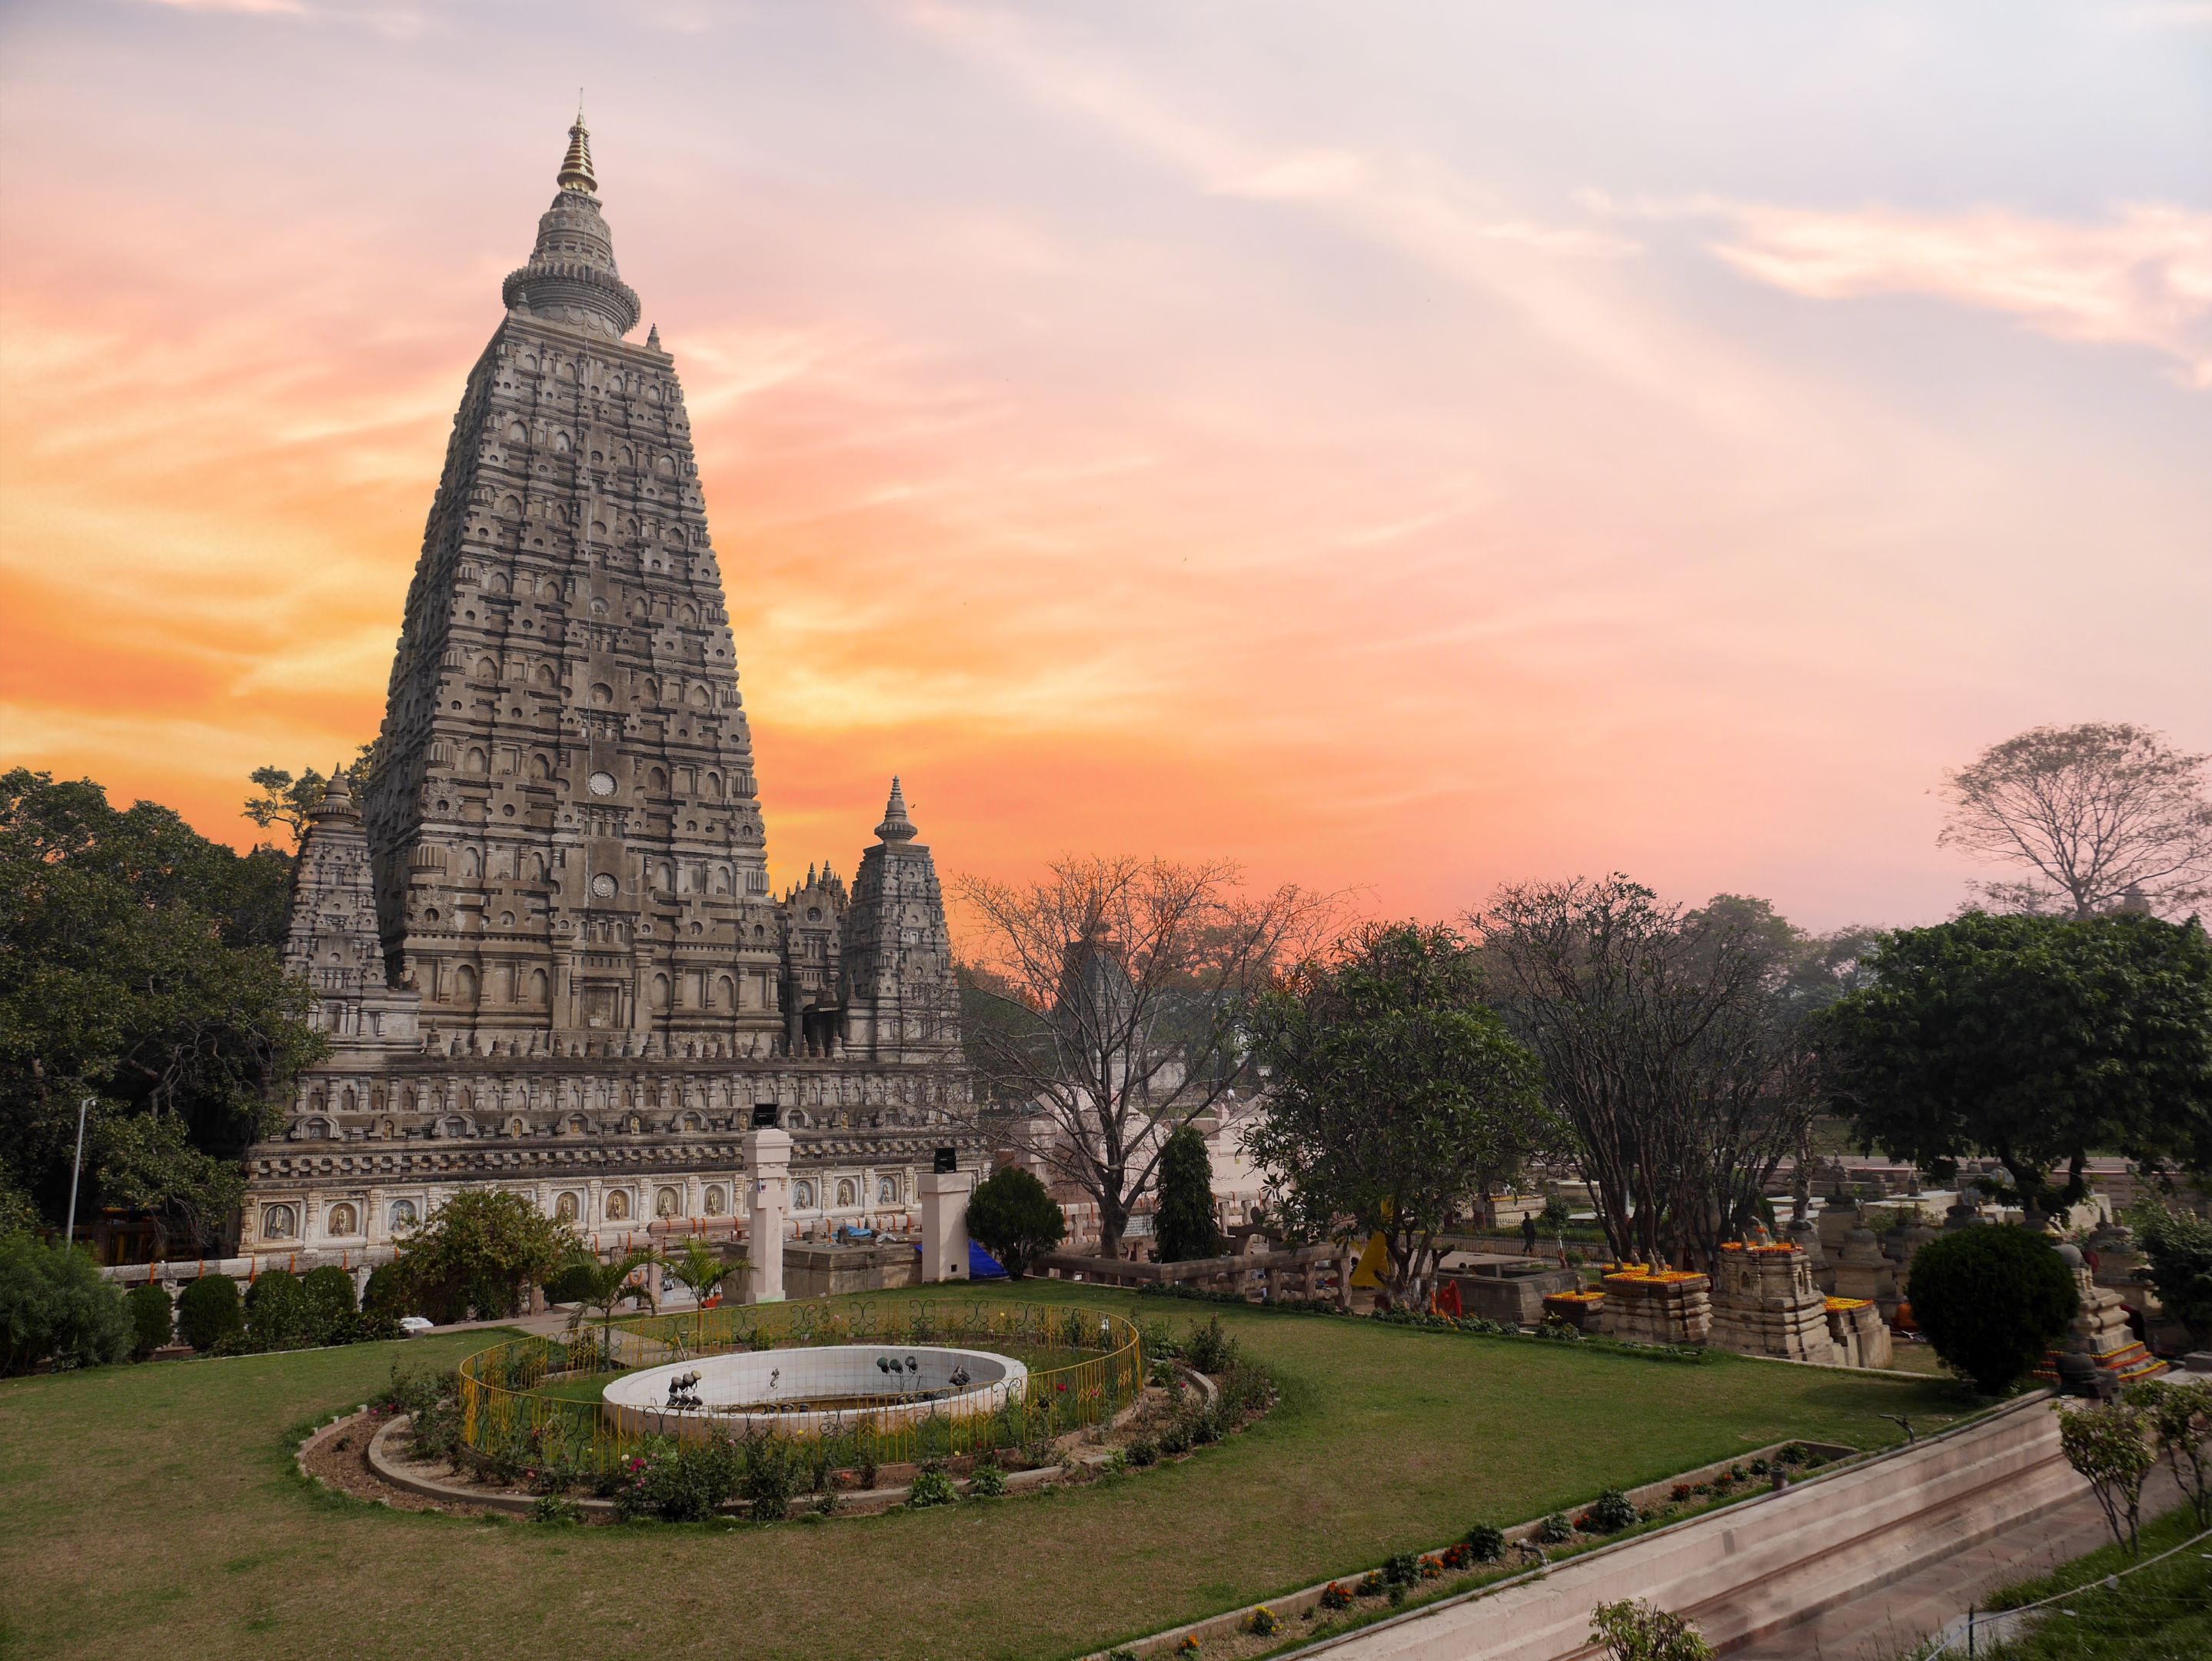 The side view of the stupa at Mahabodhi Temple Complex in Bodh Gaya, India. The Mahabodhi Vihar is a UNESCO World Heritage Site.